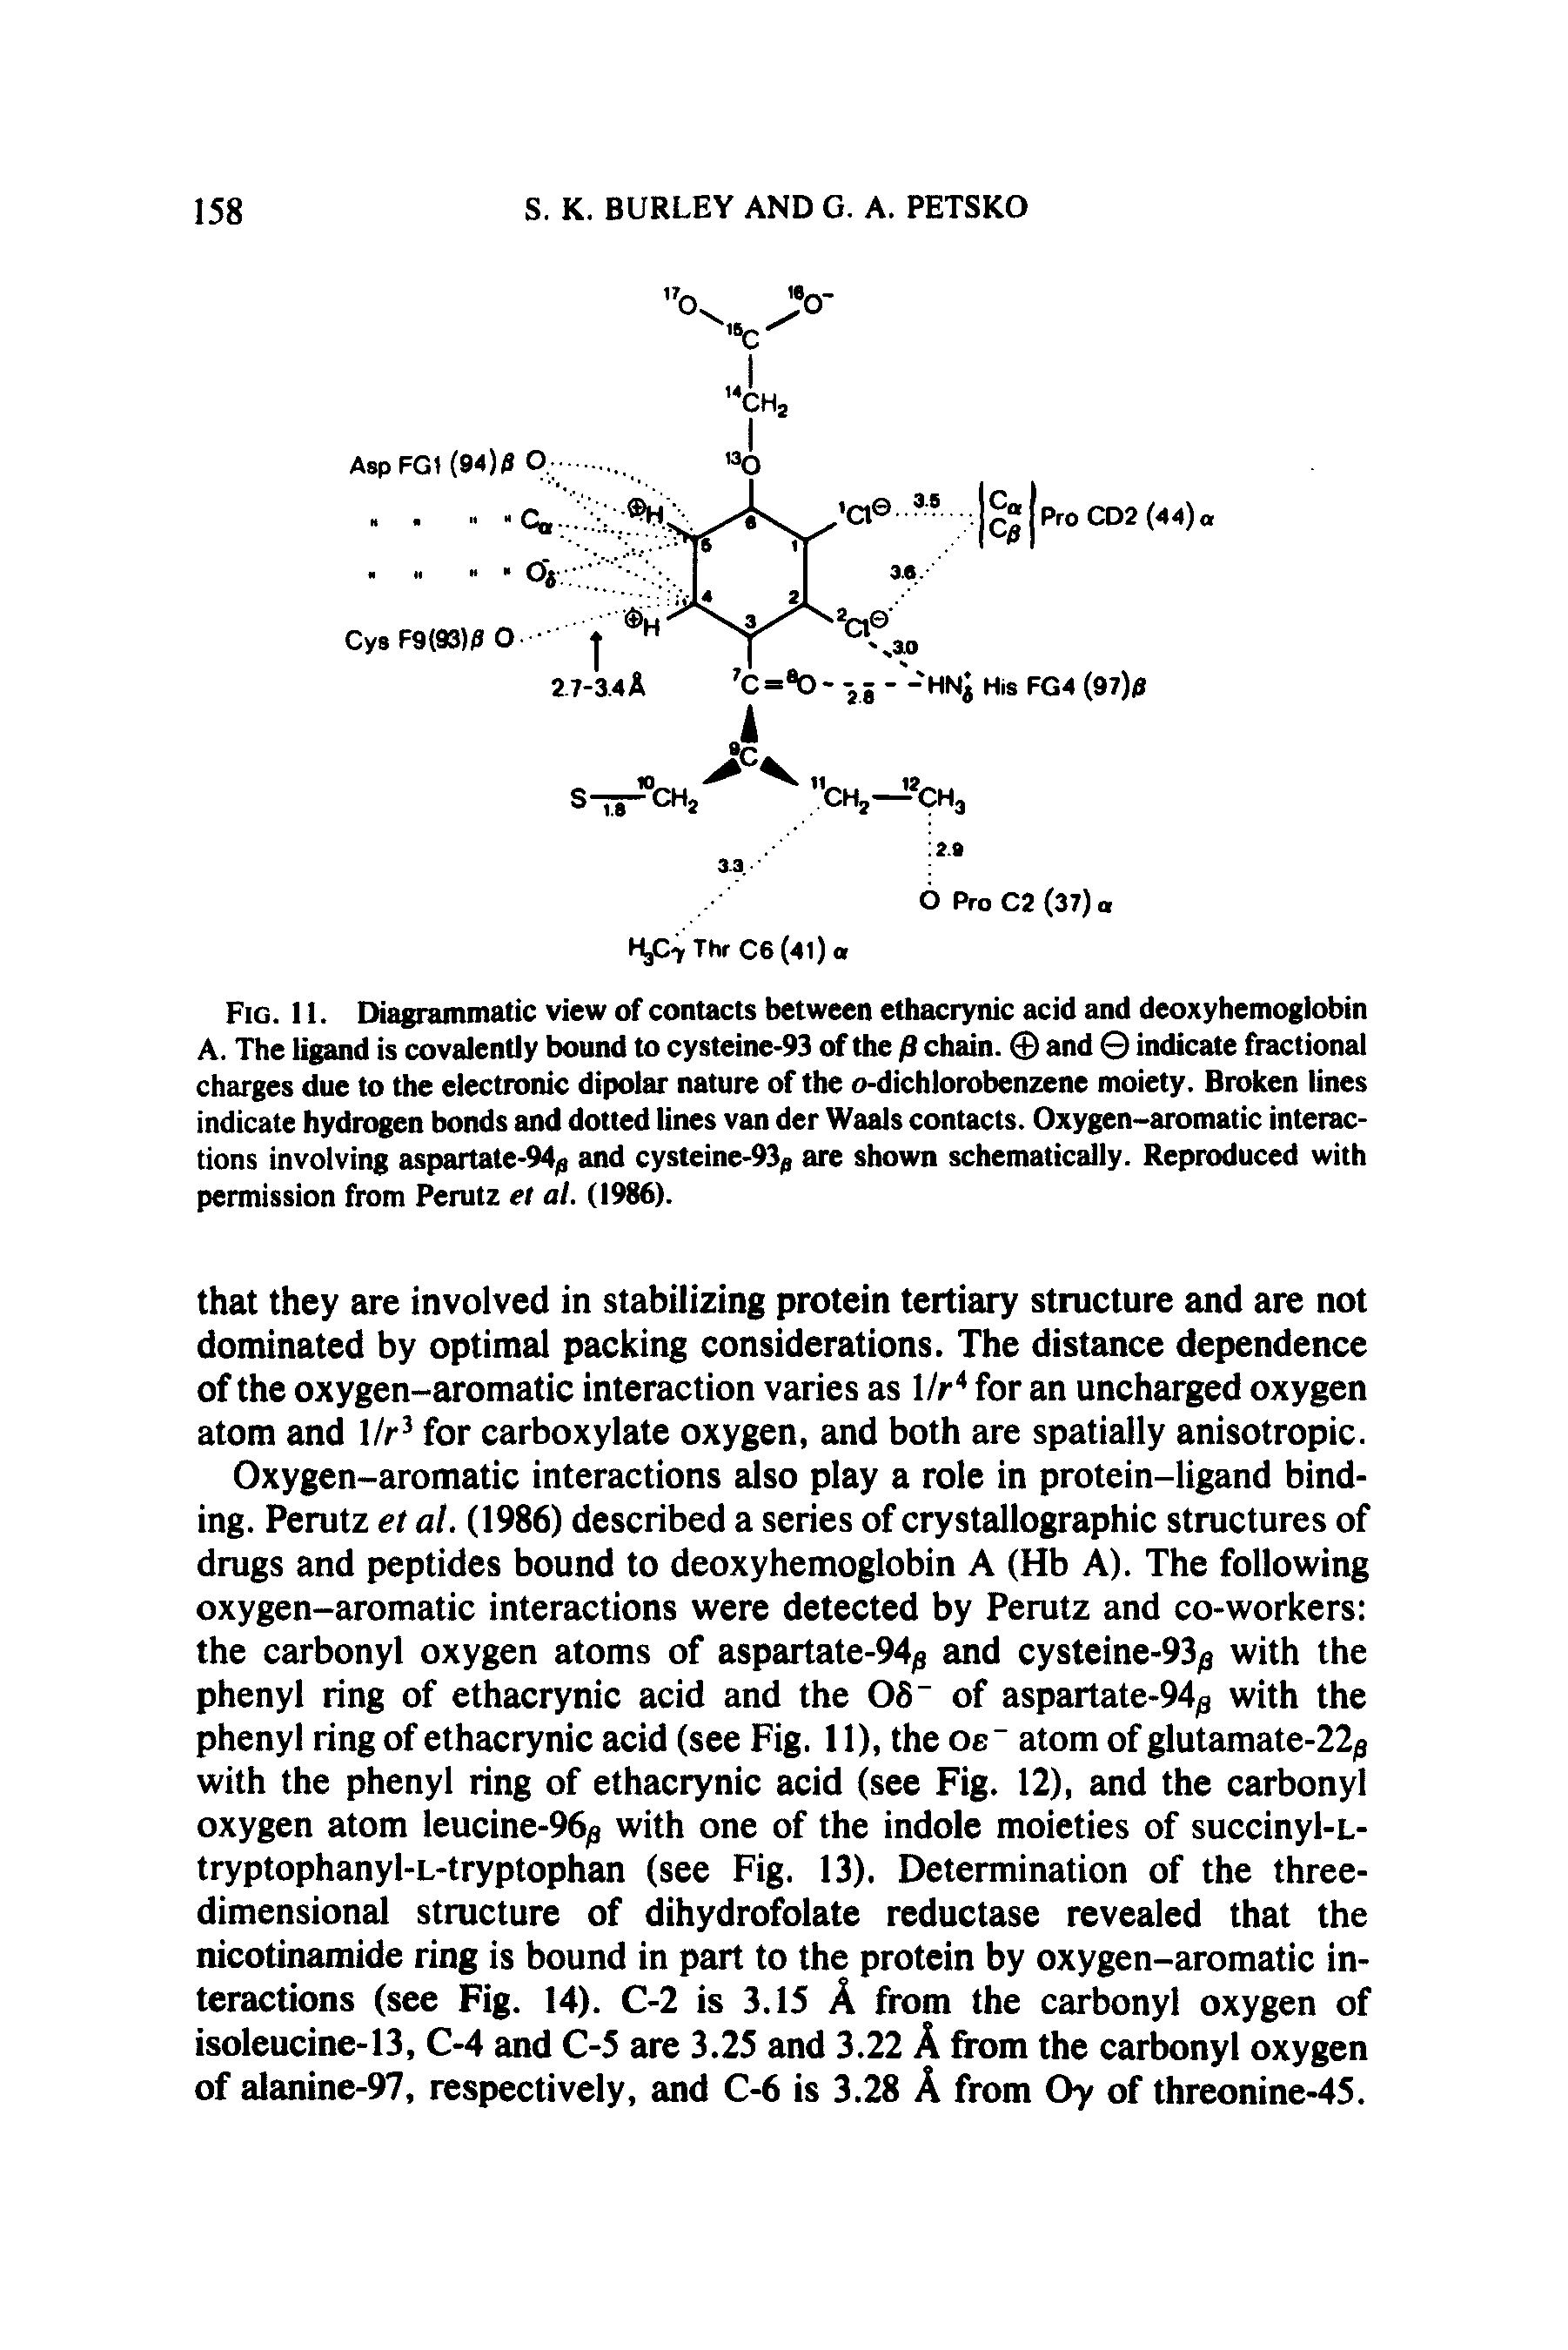 Fig. 11. Diagrammatic view of contacts between ethacrynic acid and deoxyhemoglobin A. The ligand is covalently bound to cysteine-93 of the p chain. and indicate fractional charges due to the electronic dipolar nature of the o-dichlorobenzene moiety. Broken lines indicate hydrogen bonds and dotted lines van der Waals contacts. Oxygen-aromatic interactions involving aspartate-94 and cysteine-93 are shown schematically. Reproduced with permission from Perutz et al. (1986).